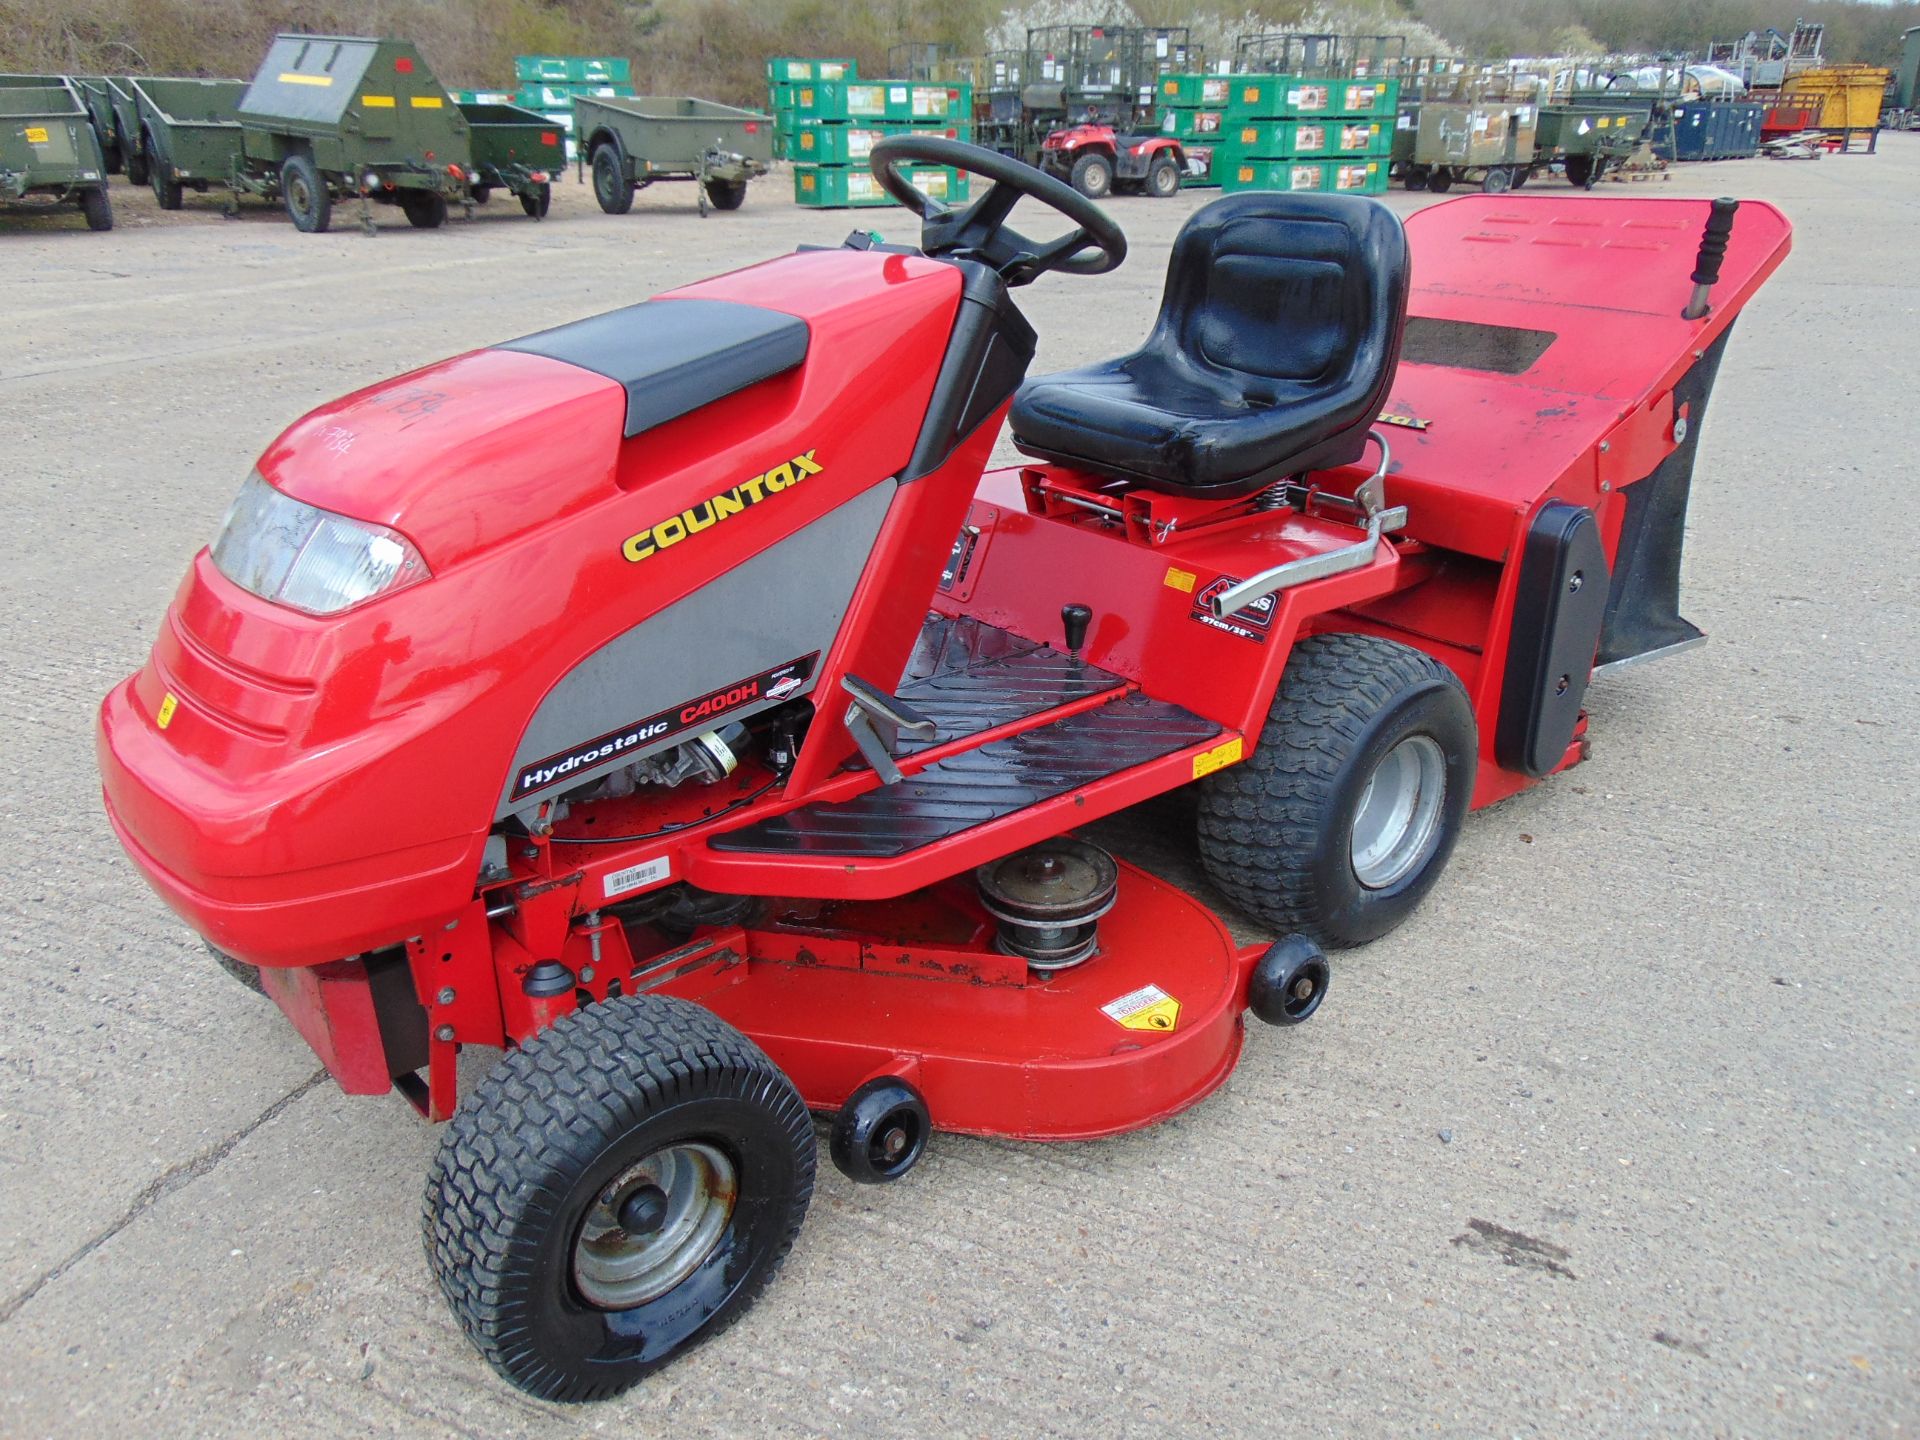 Countax C400H Ride On Mower / Lawn Tractor - Image 3 of 13